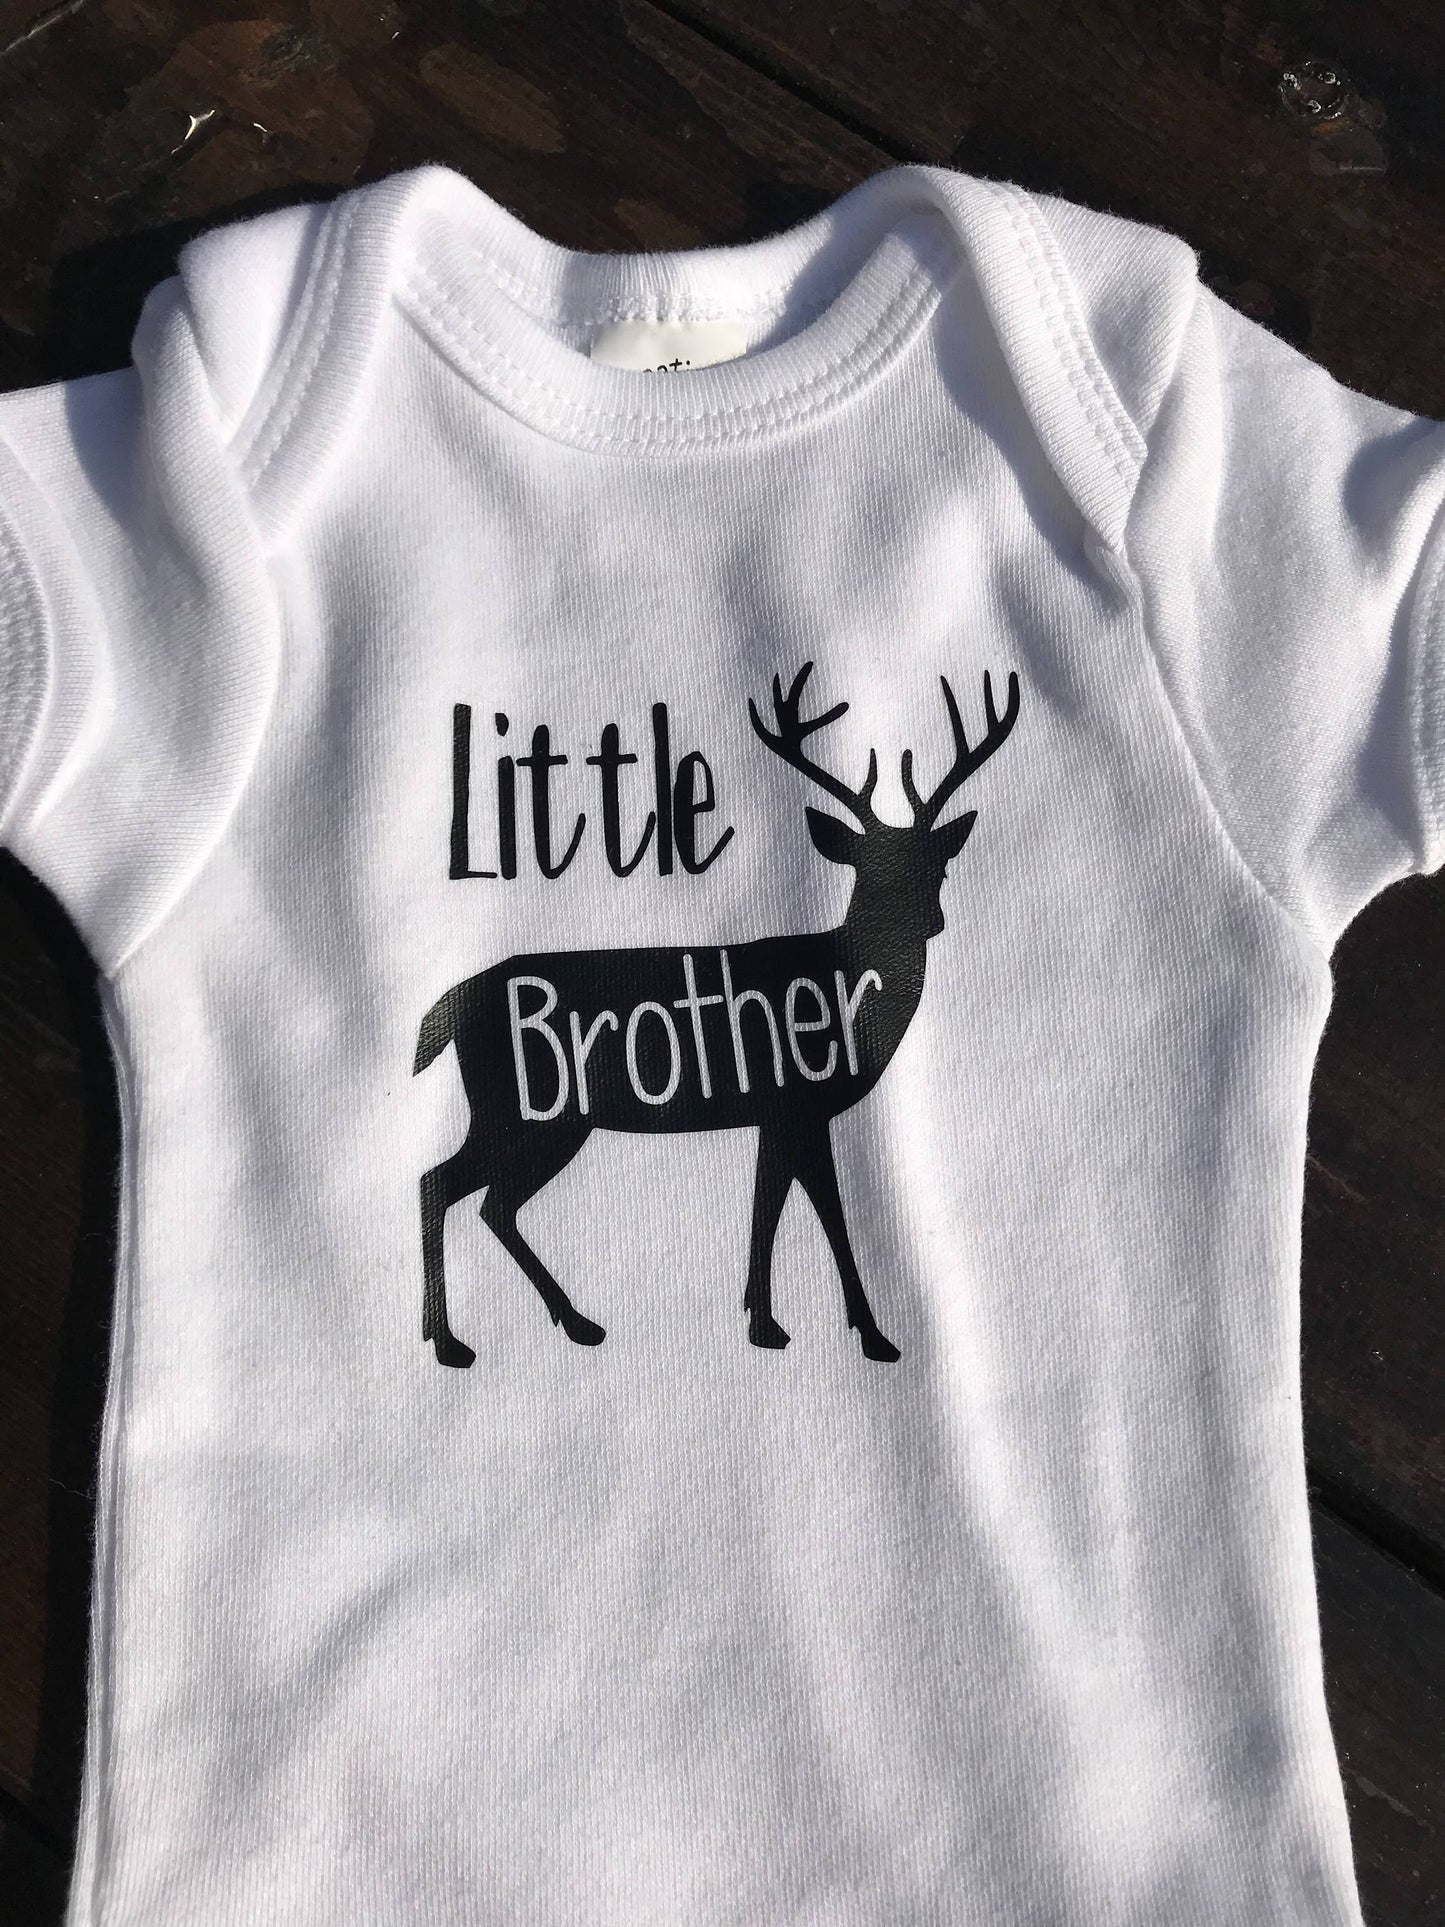 Handcrafted Children's Clothing, Clothing for Children and Parents, Big Brother & Little Brother Shirt Set, chi-fashionista